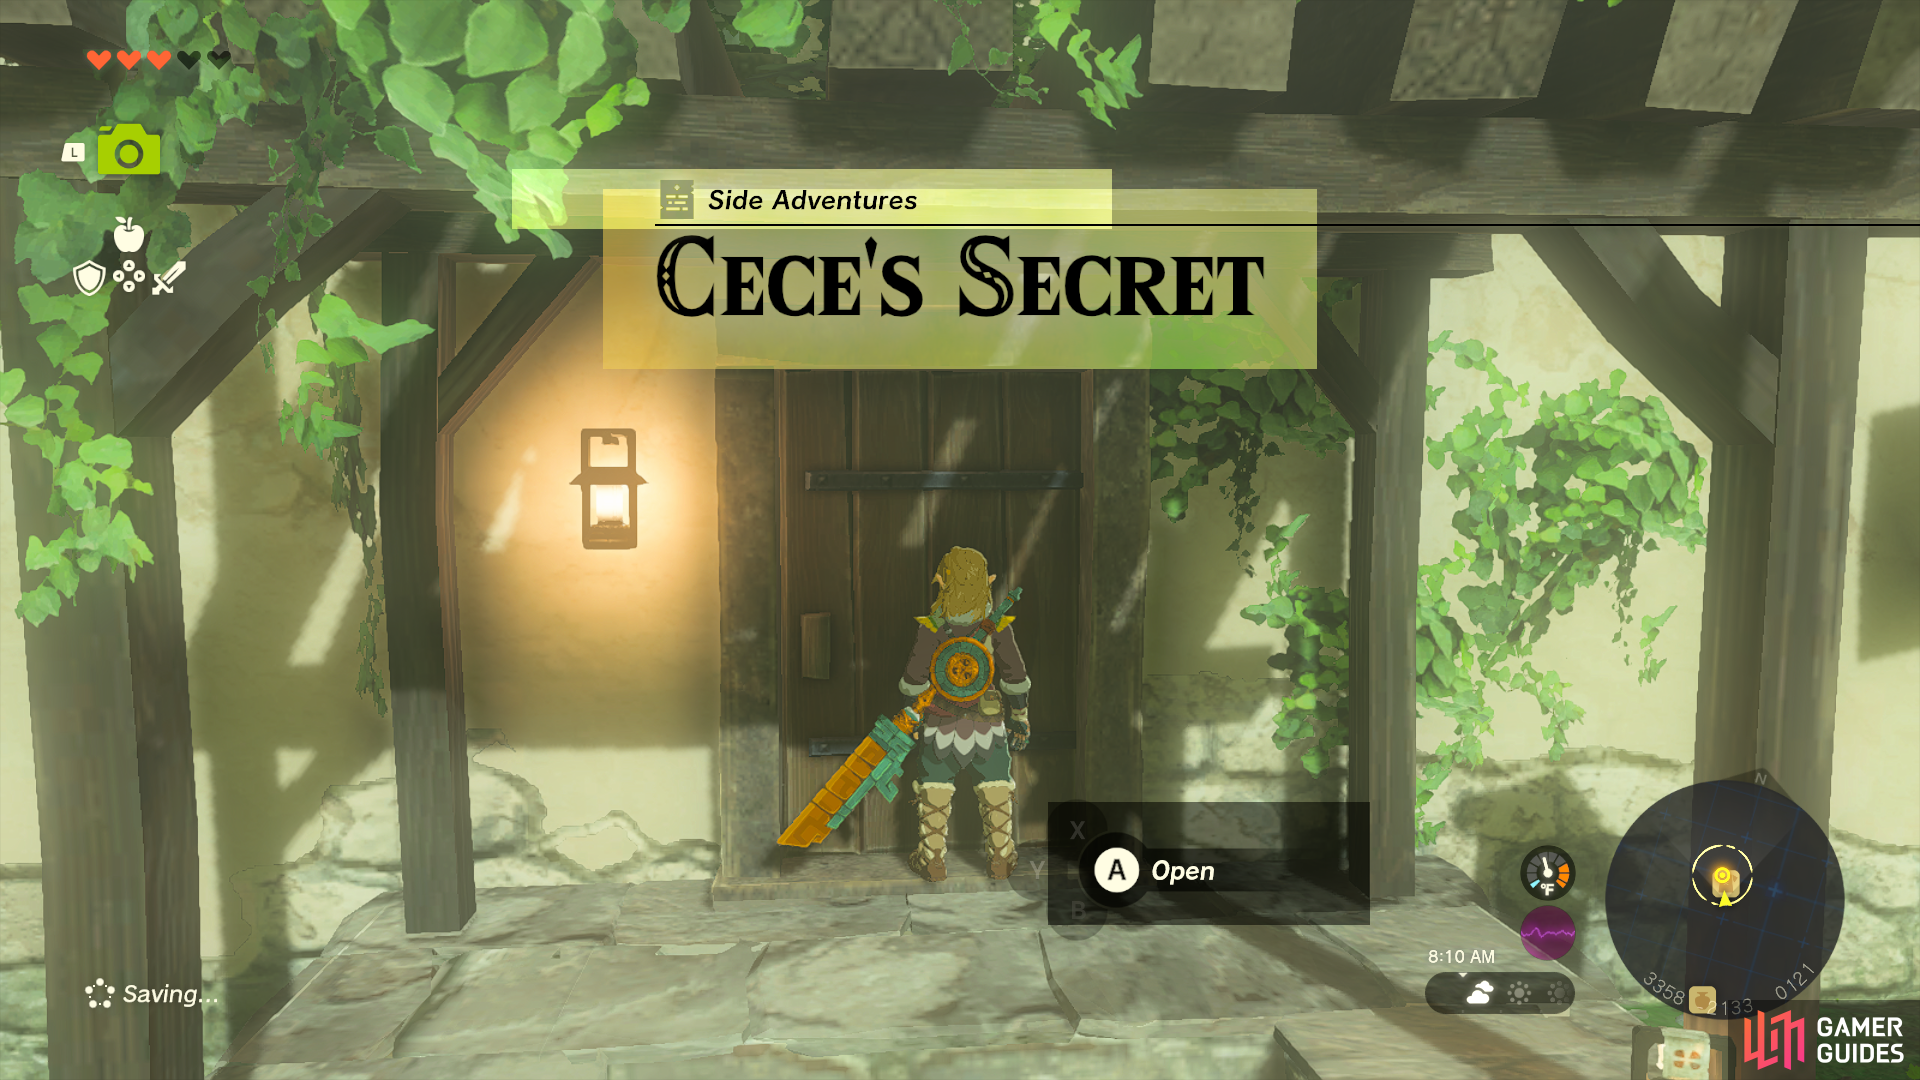 You can get the Cece’s Secret quest from Sophie.